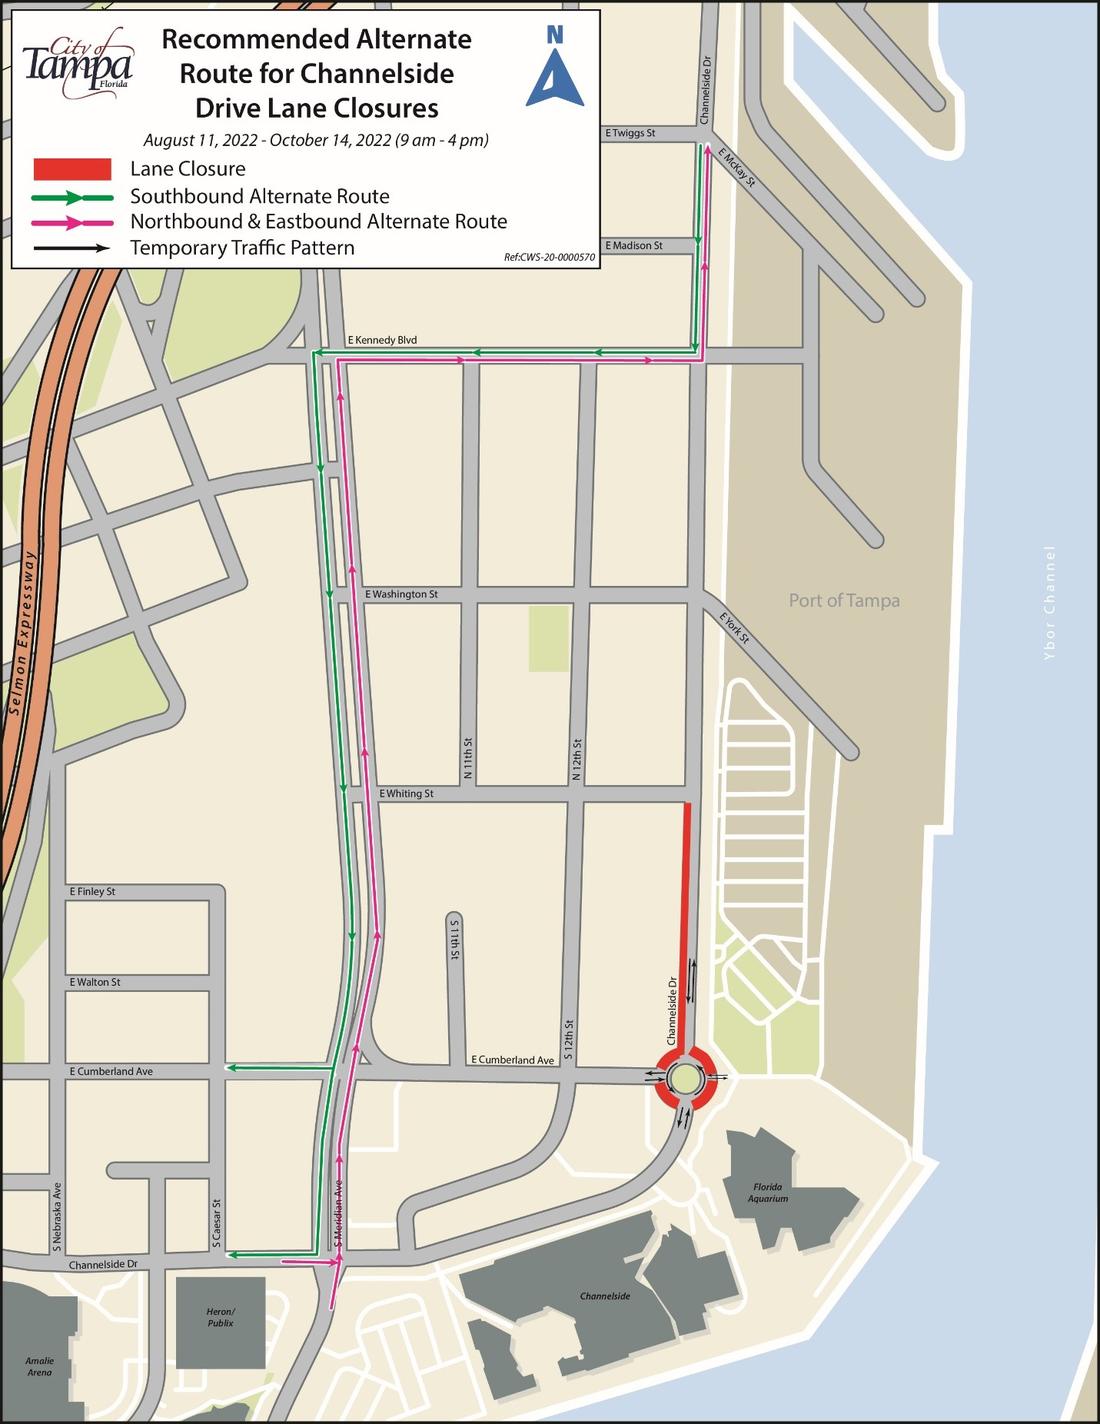 Traffic Advisory: Temporary Lane Closure Channelside Dr to begin August 11, 2022 for Road Construction